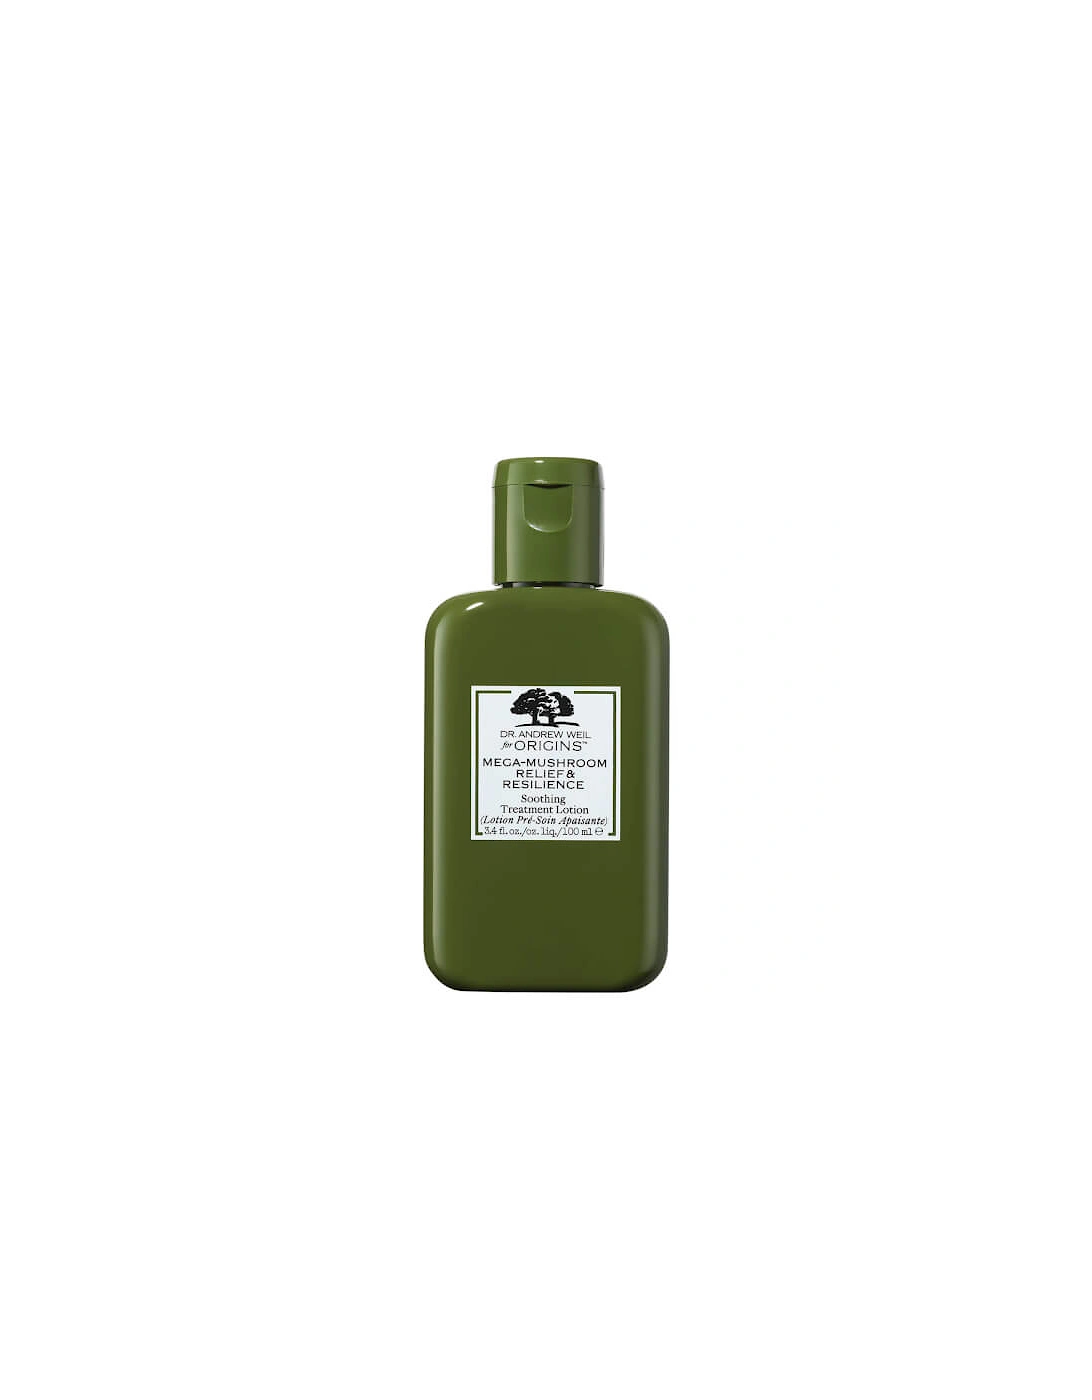 Dr. Andrew Weil for Mega-Mushroom Treatment Lotion Upgrade 100ml, 2 of 1